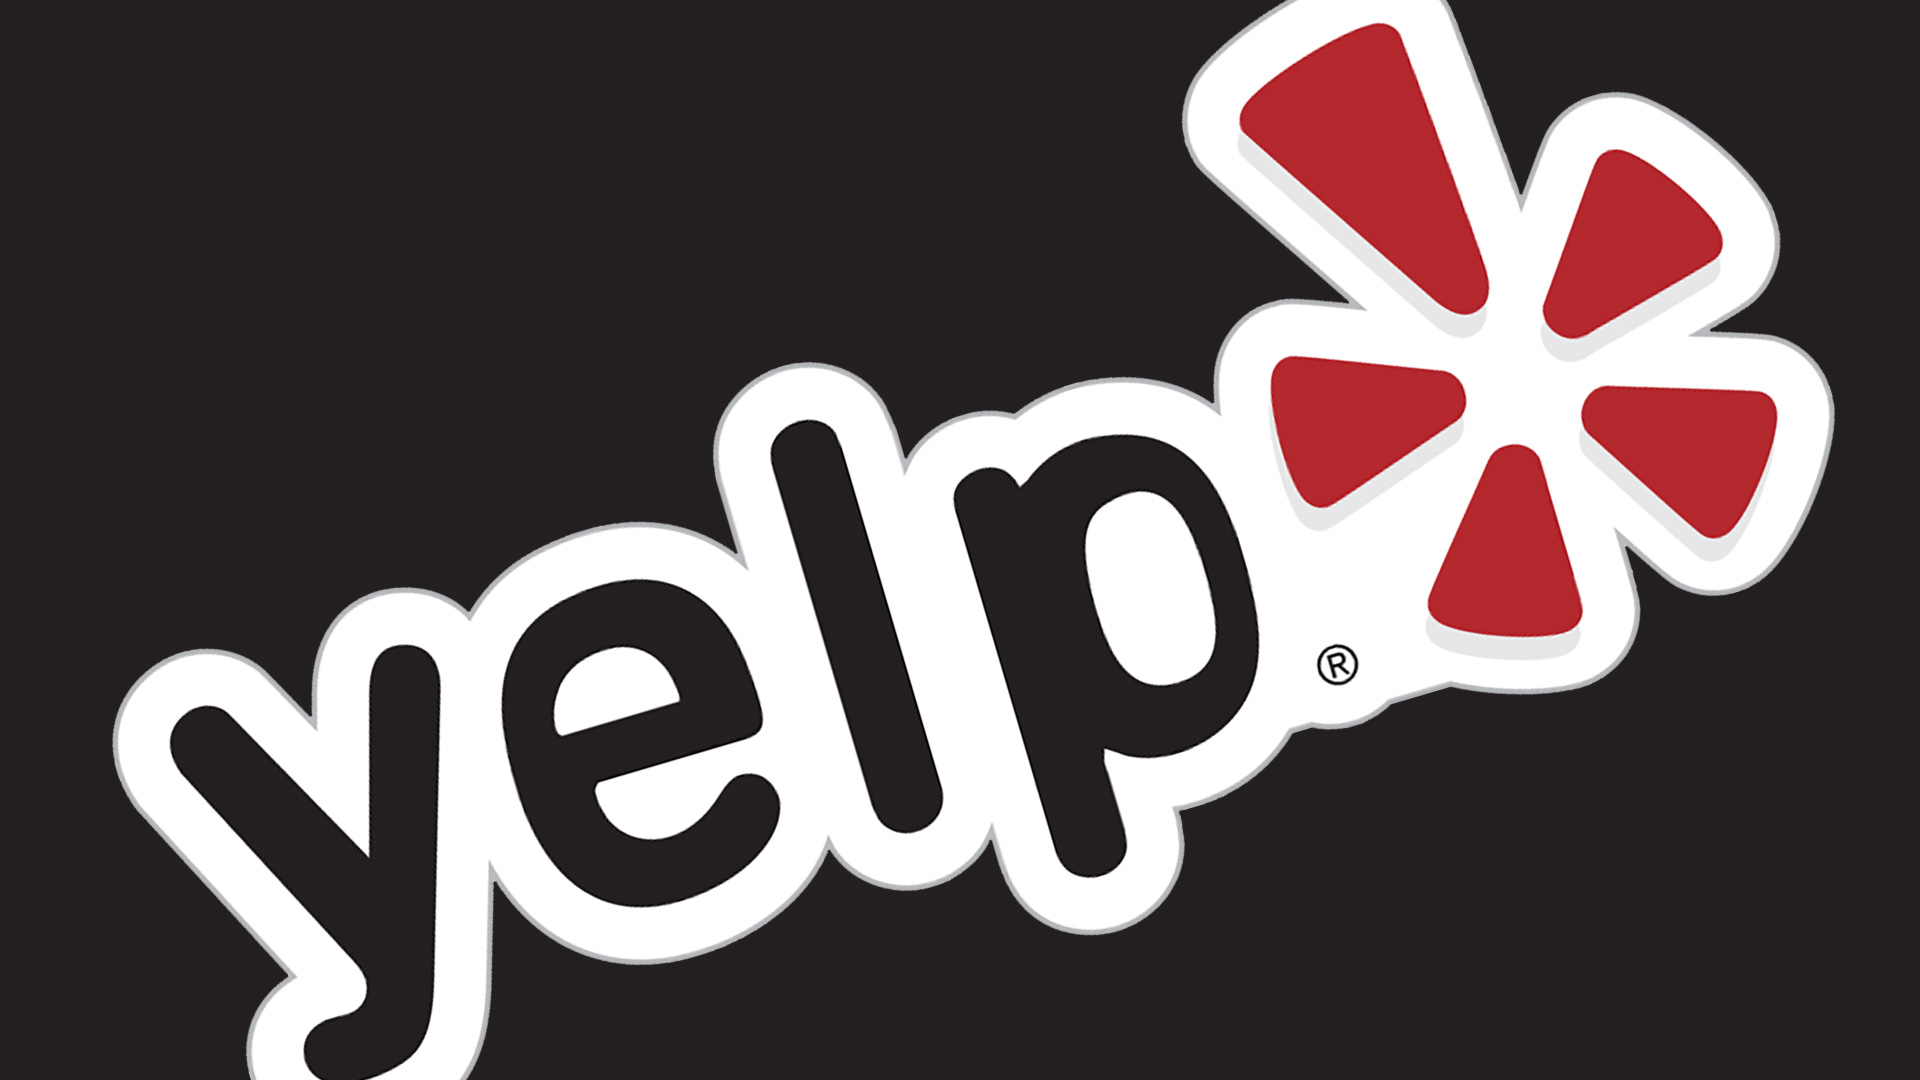 Yelp Reviews: How to Manage Your Restaurant’s Reviews